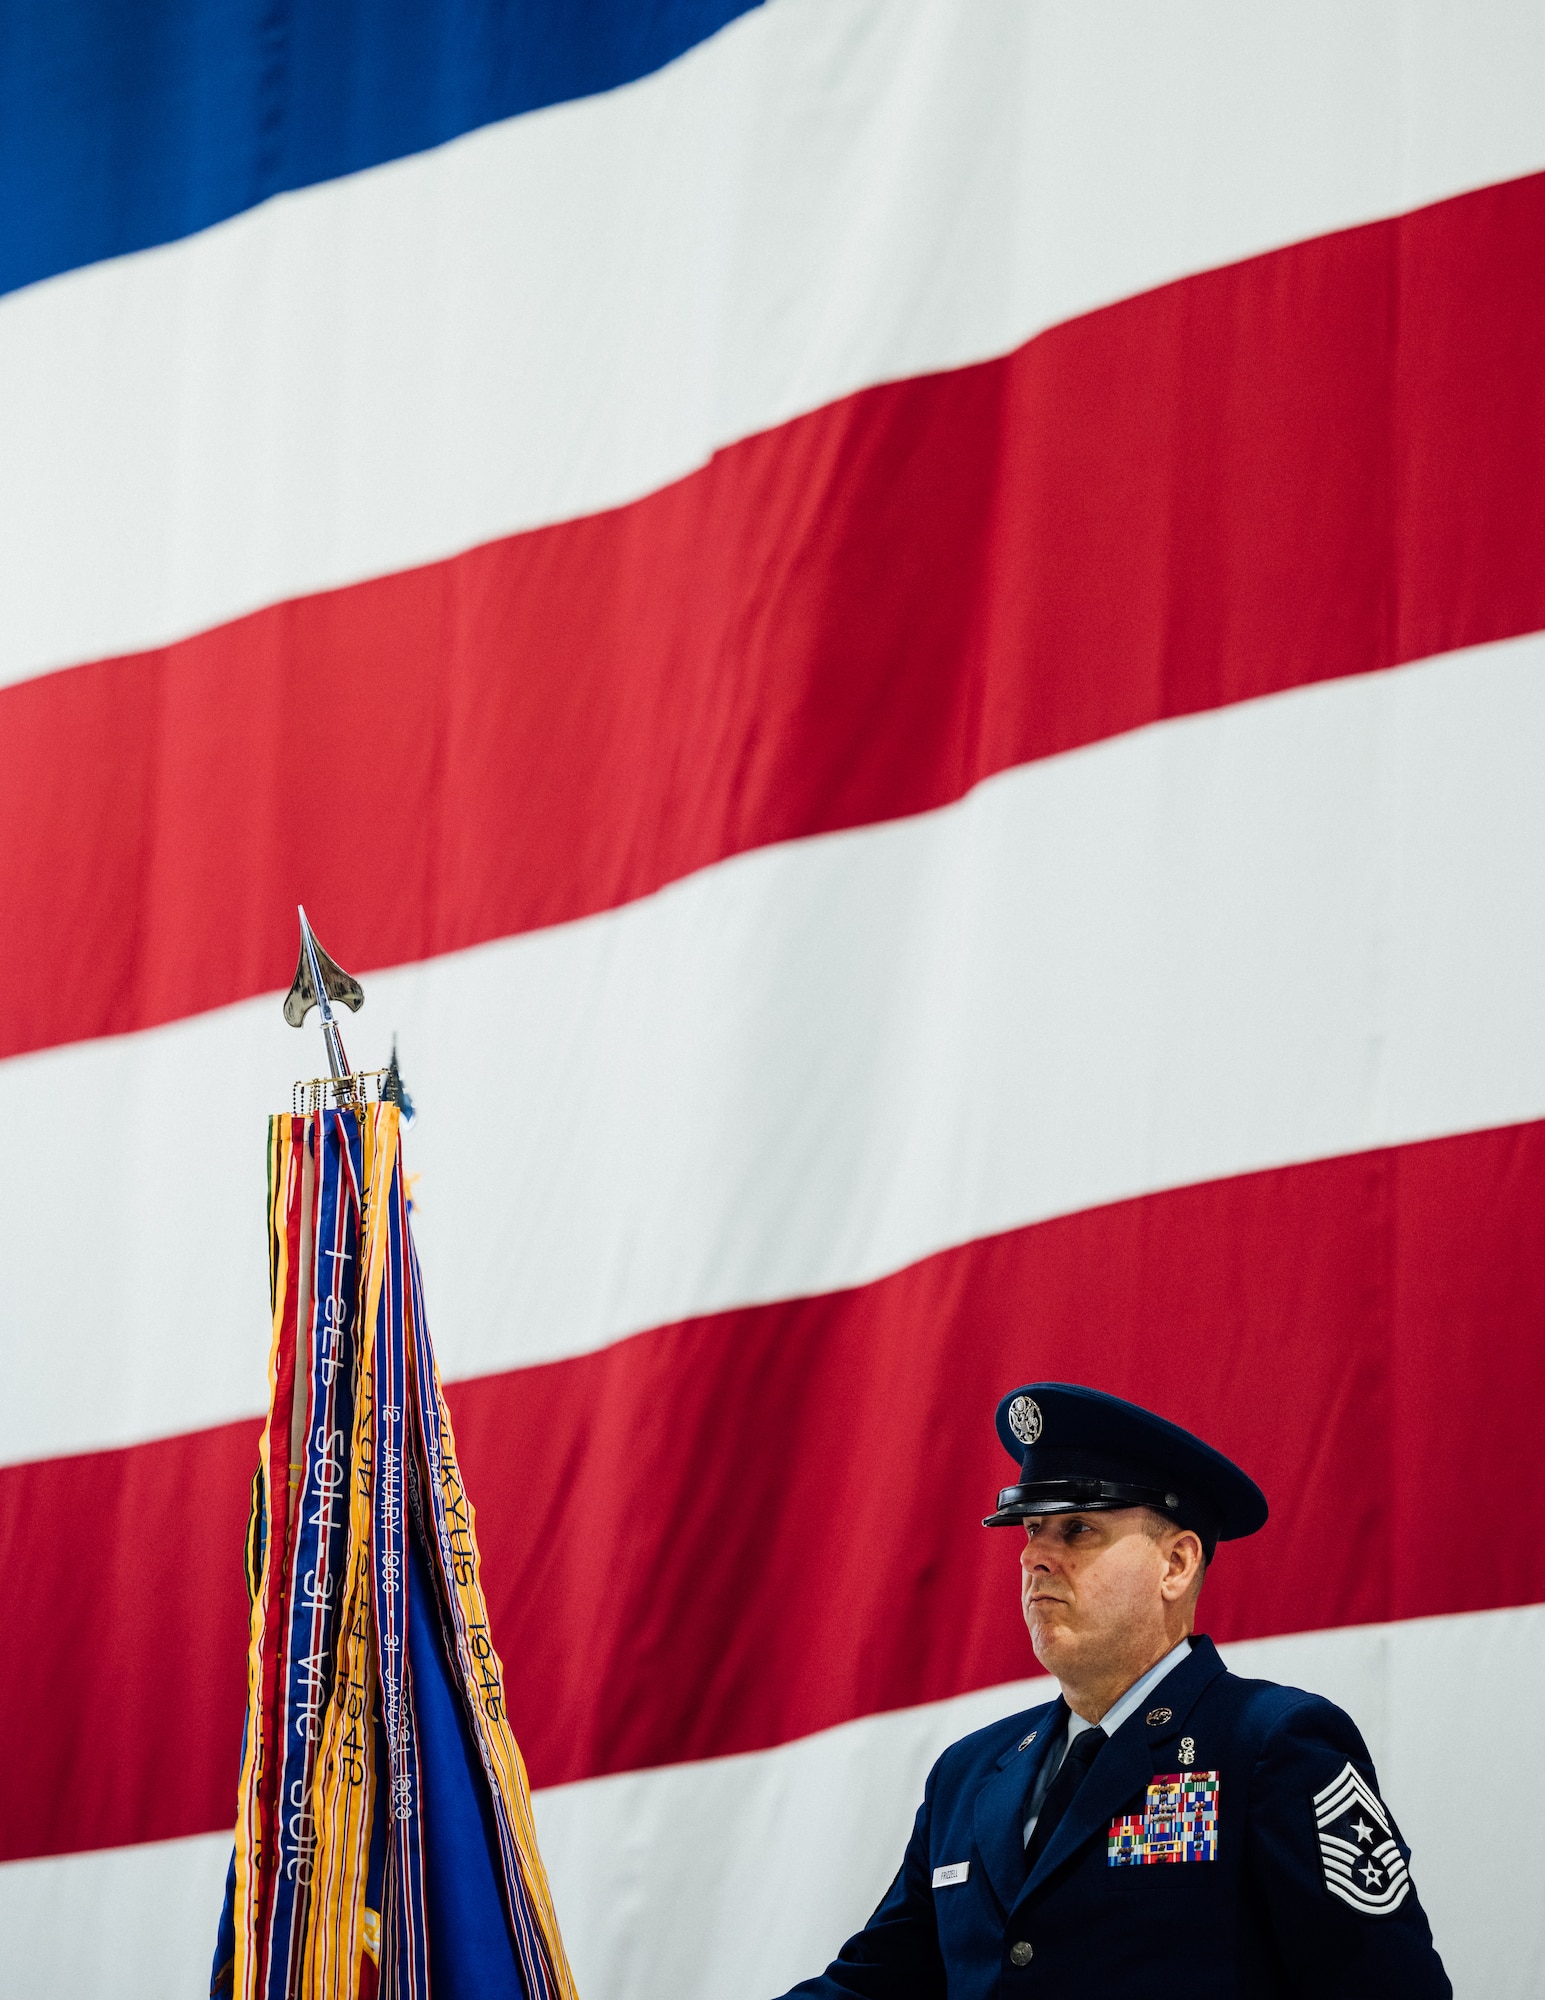 Chief Master Sgt. Chuck Frizzell, 375th Air Mobility Wing command chief, stands posted with the 375th AMW’s guidon prior to the change of command ceremony transferring leadership to Col. Chris Robinson on Scott Air Force Base, Illinois, July 1, 2021. The change of command ceremony represents a time-honored military tradition providing an opportunity for Airmen to witness the transfer of power to their newly appointed commanding officer. (U.S. Air Force photo by Tech. Sgt. Jordan Castelan)